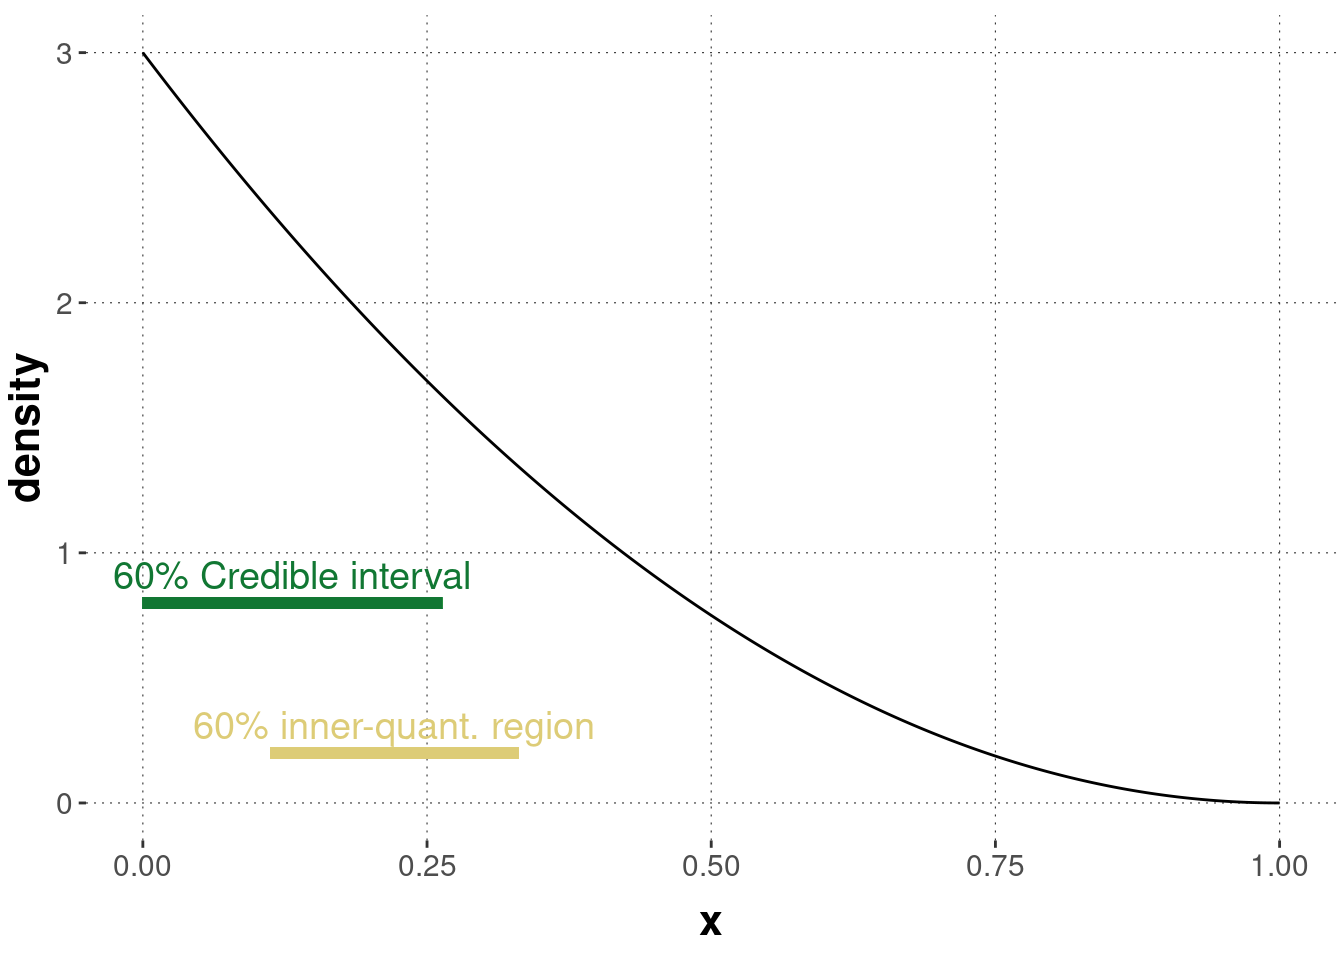 Difference between a 95% credible interval and a 95% inner-quantile region.